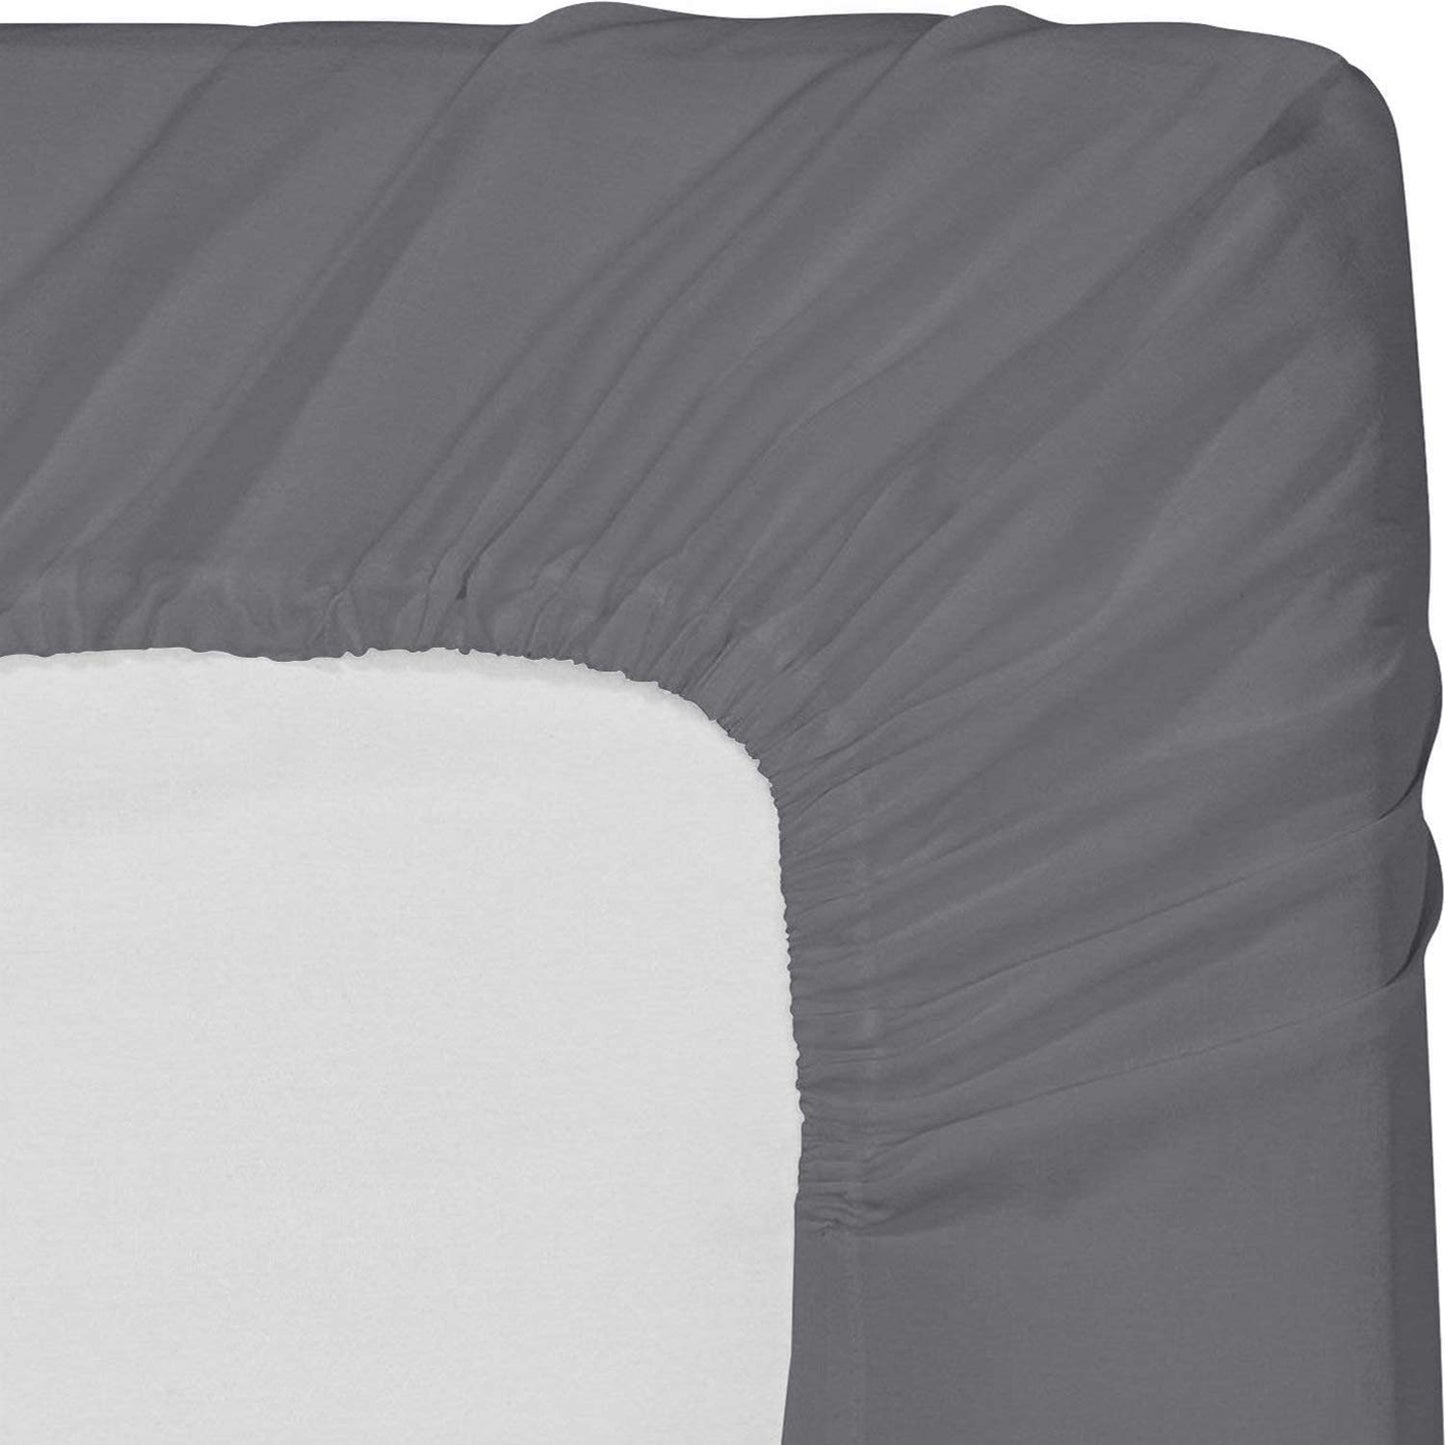 Utopia Bedding Twin Fitted Sheet - Bottom Sheet - Deep Pocket - Soft Microfiber -Shrinkage and Fade Resistant-Easy Care -1 Fitted Sheet Only (Grey)